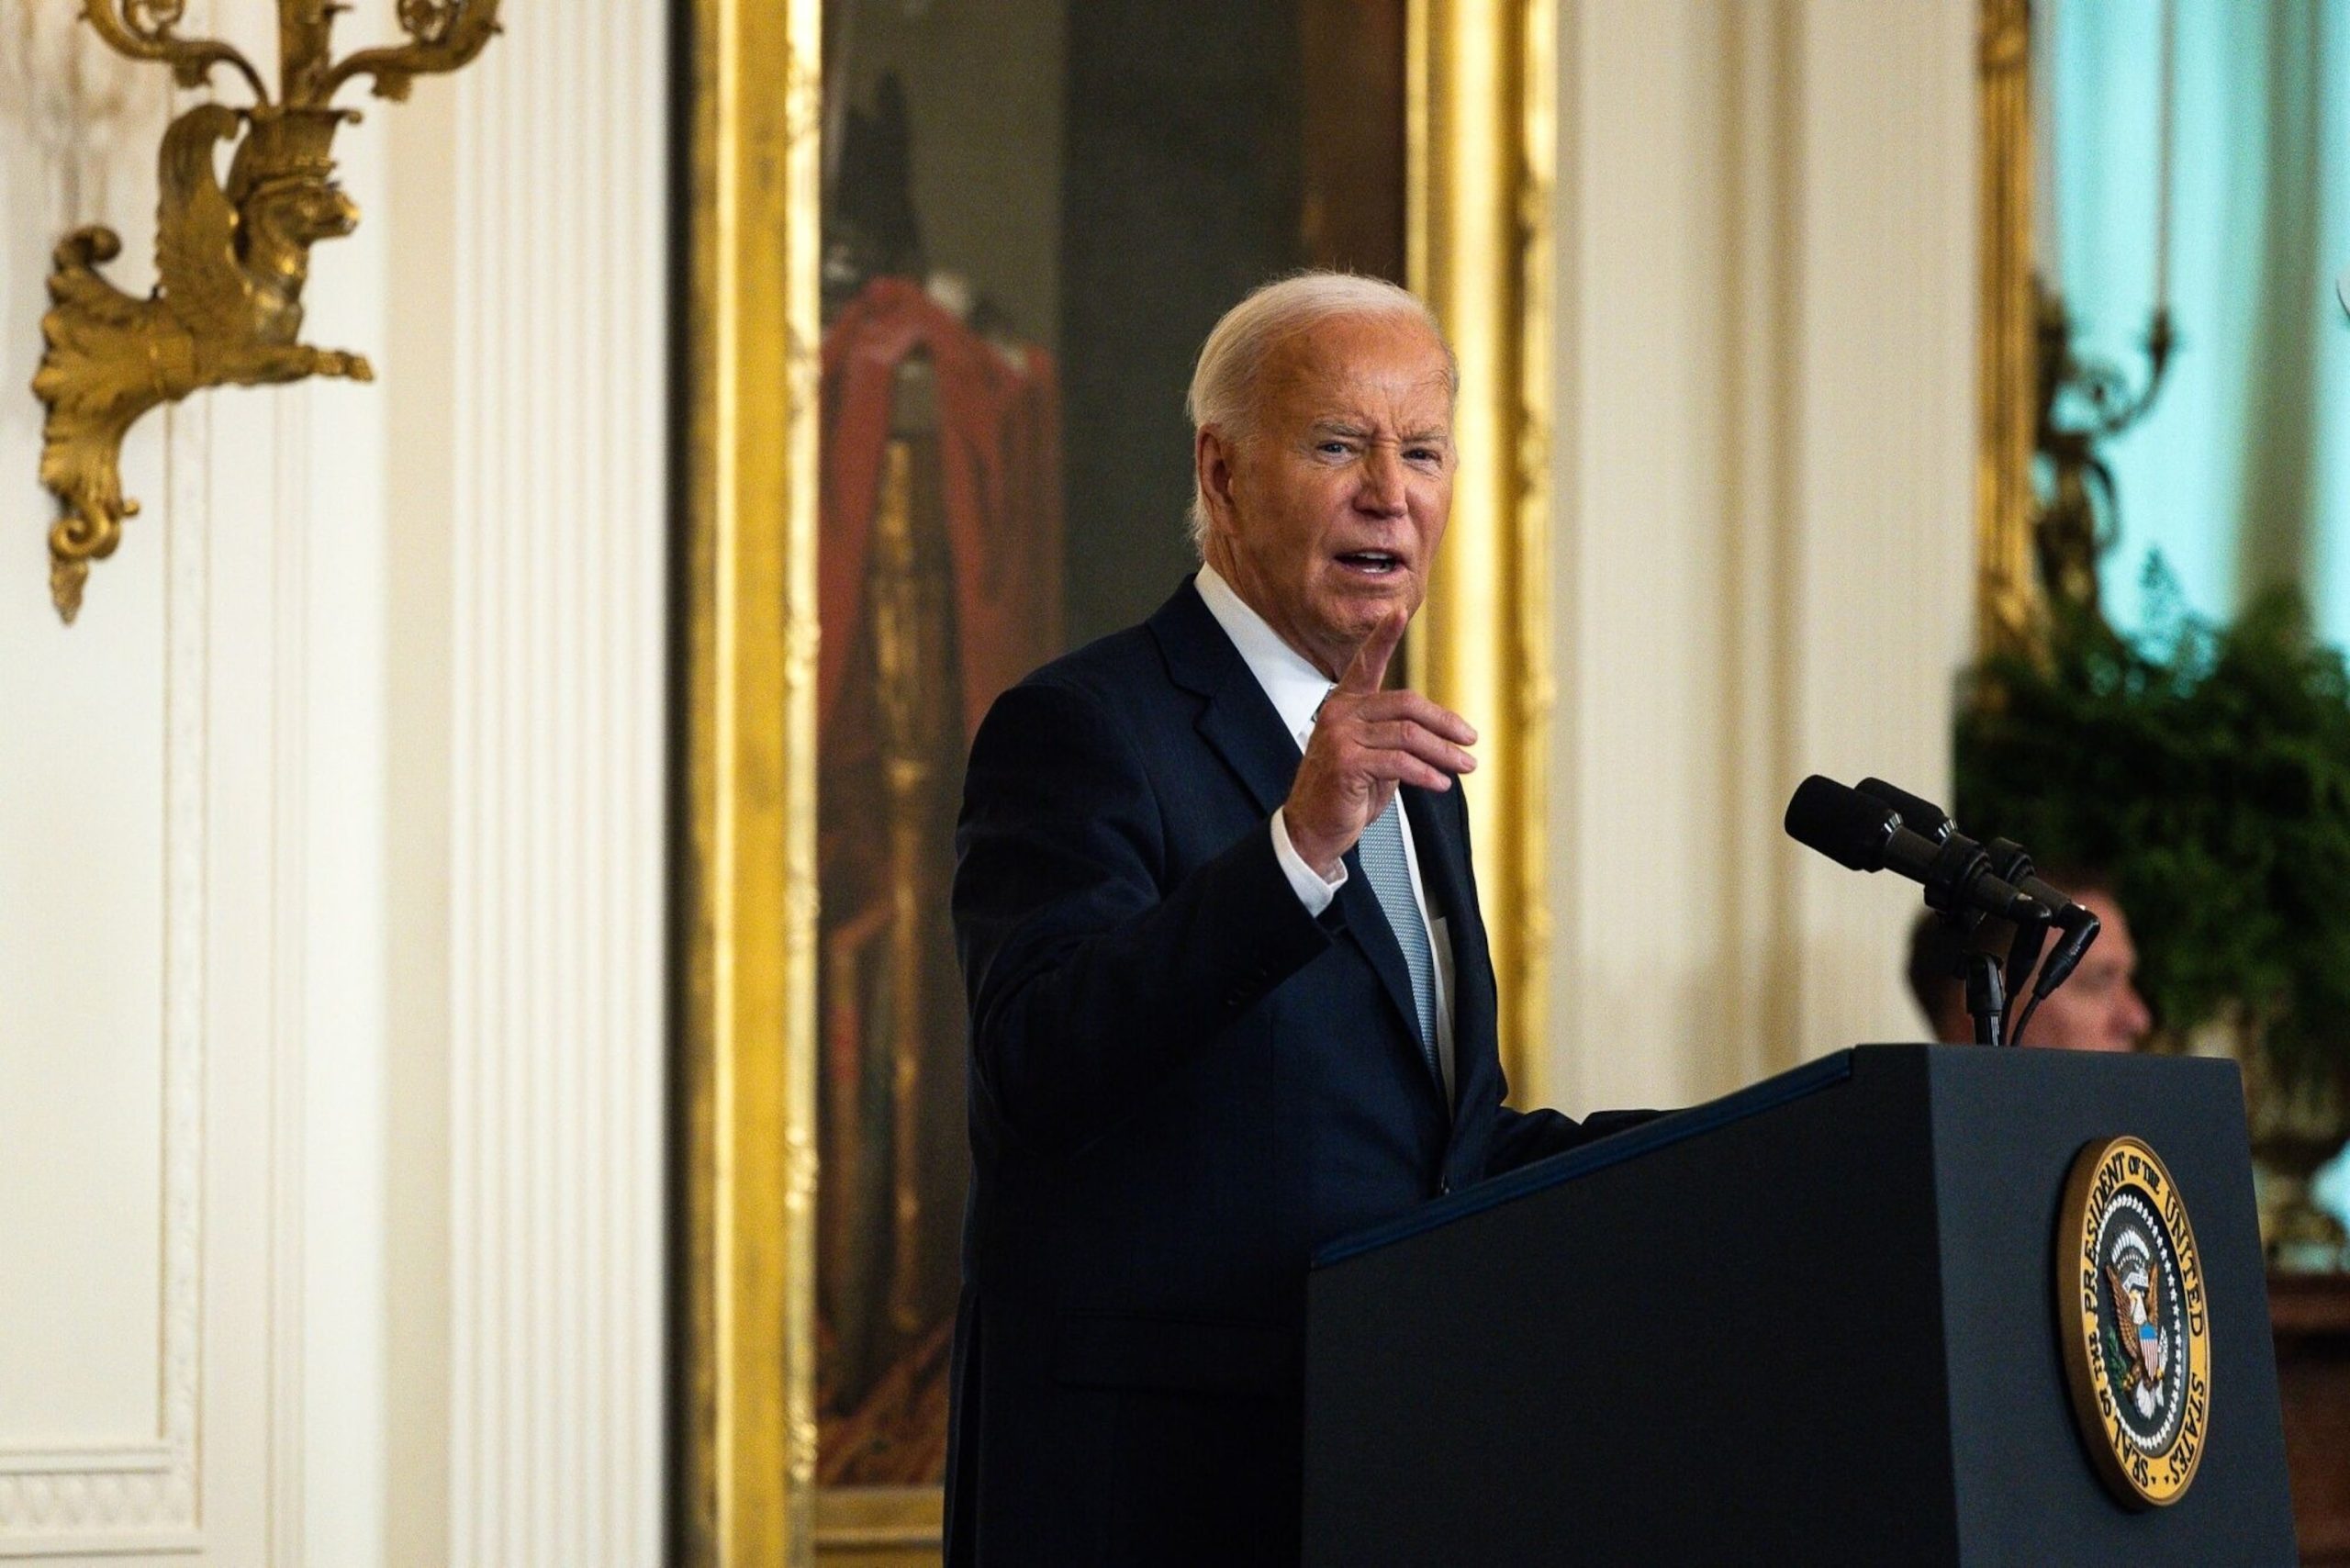 Sources confirm that Biden underwent a medical checkup after the debate and is reported to be in good health, as relayed to governors.